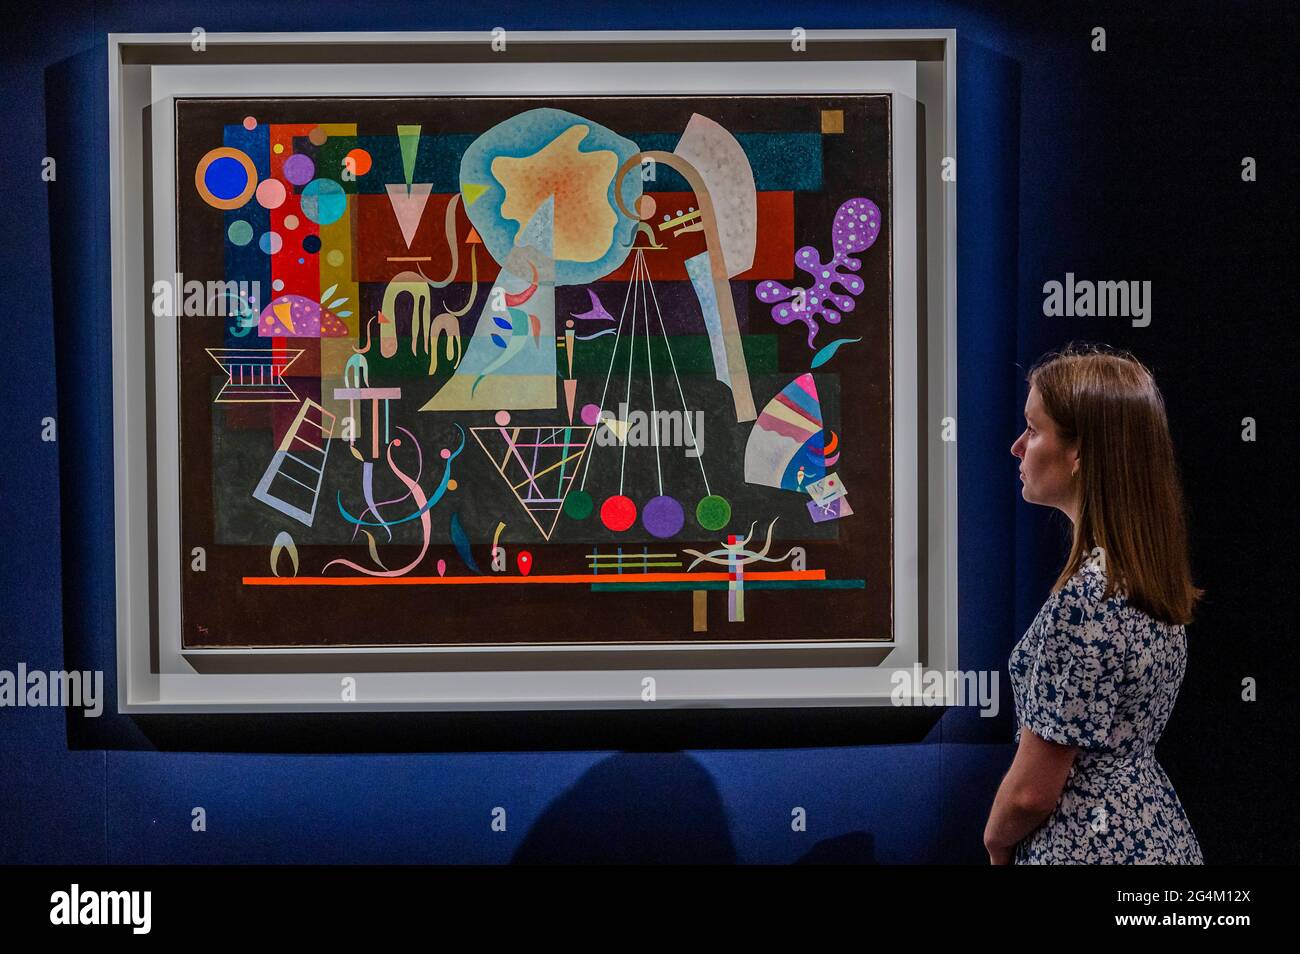 London, UK. 22nd June, 2021. Wassily Kandinsky, Tensions calmées, 1937 (est. £18-25 million) - Preview of the Modern & Contemporary Art Evening Sale at Sotheby's New Bond Street Galleries, London. The sale takes place on 29 June. Credit: Guy Bell/Alamy Live News Stock Photo